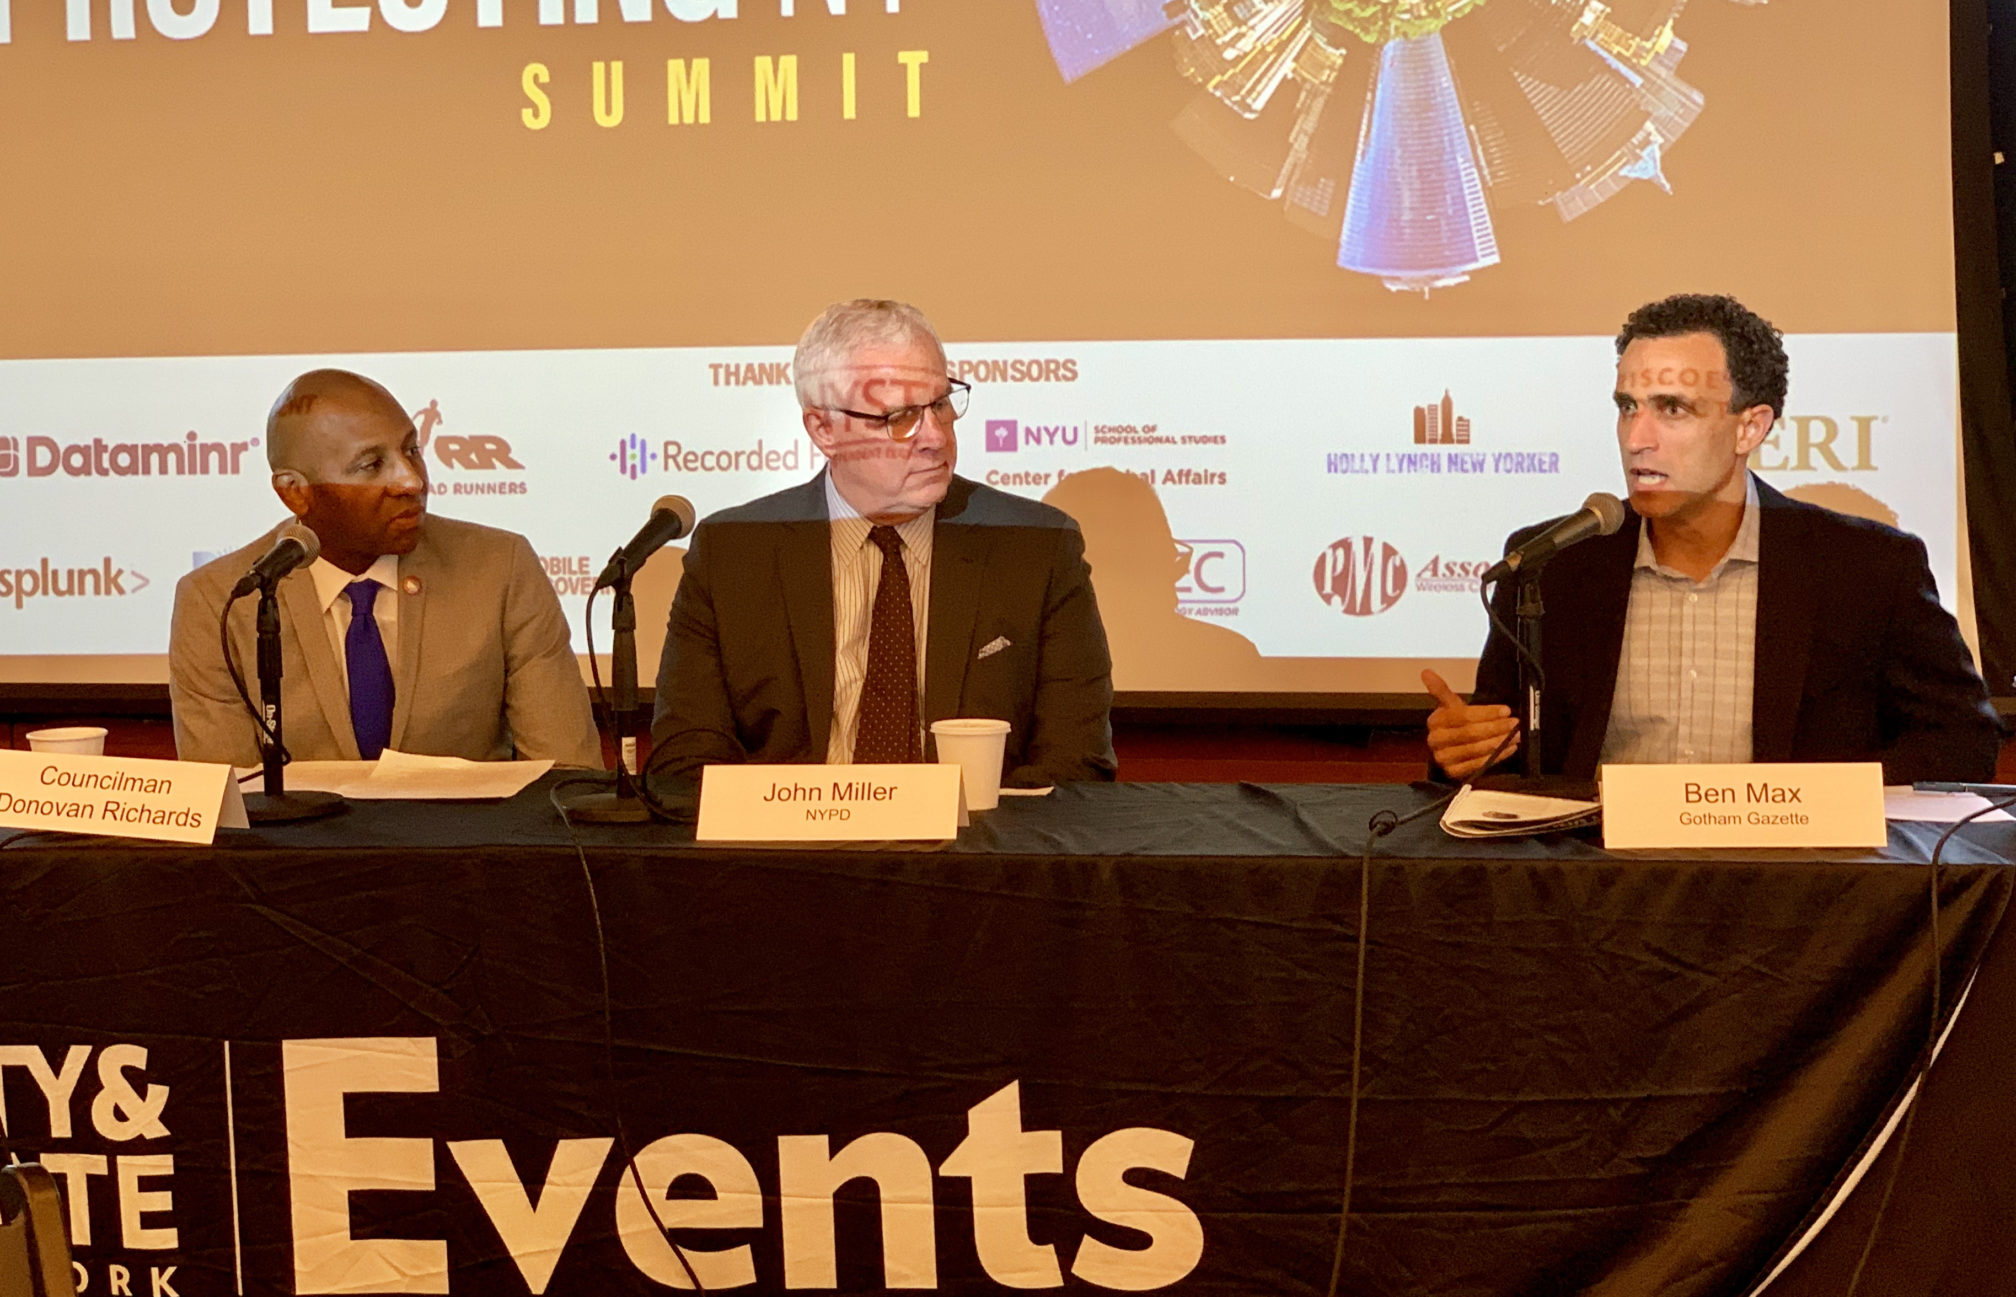 From left: Councilmember Donovan Richards, NYPD’s John Miller and Gothamist’s Ben Max at the Protecting NY Summit. Eagle photo by Mary Frost